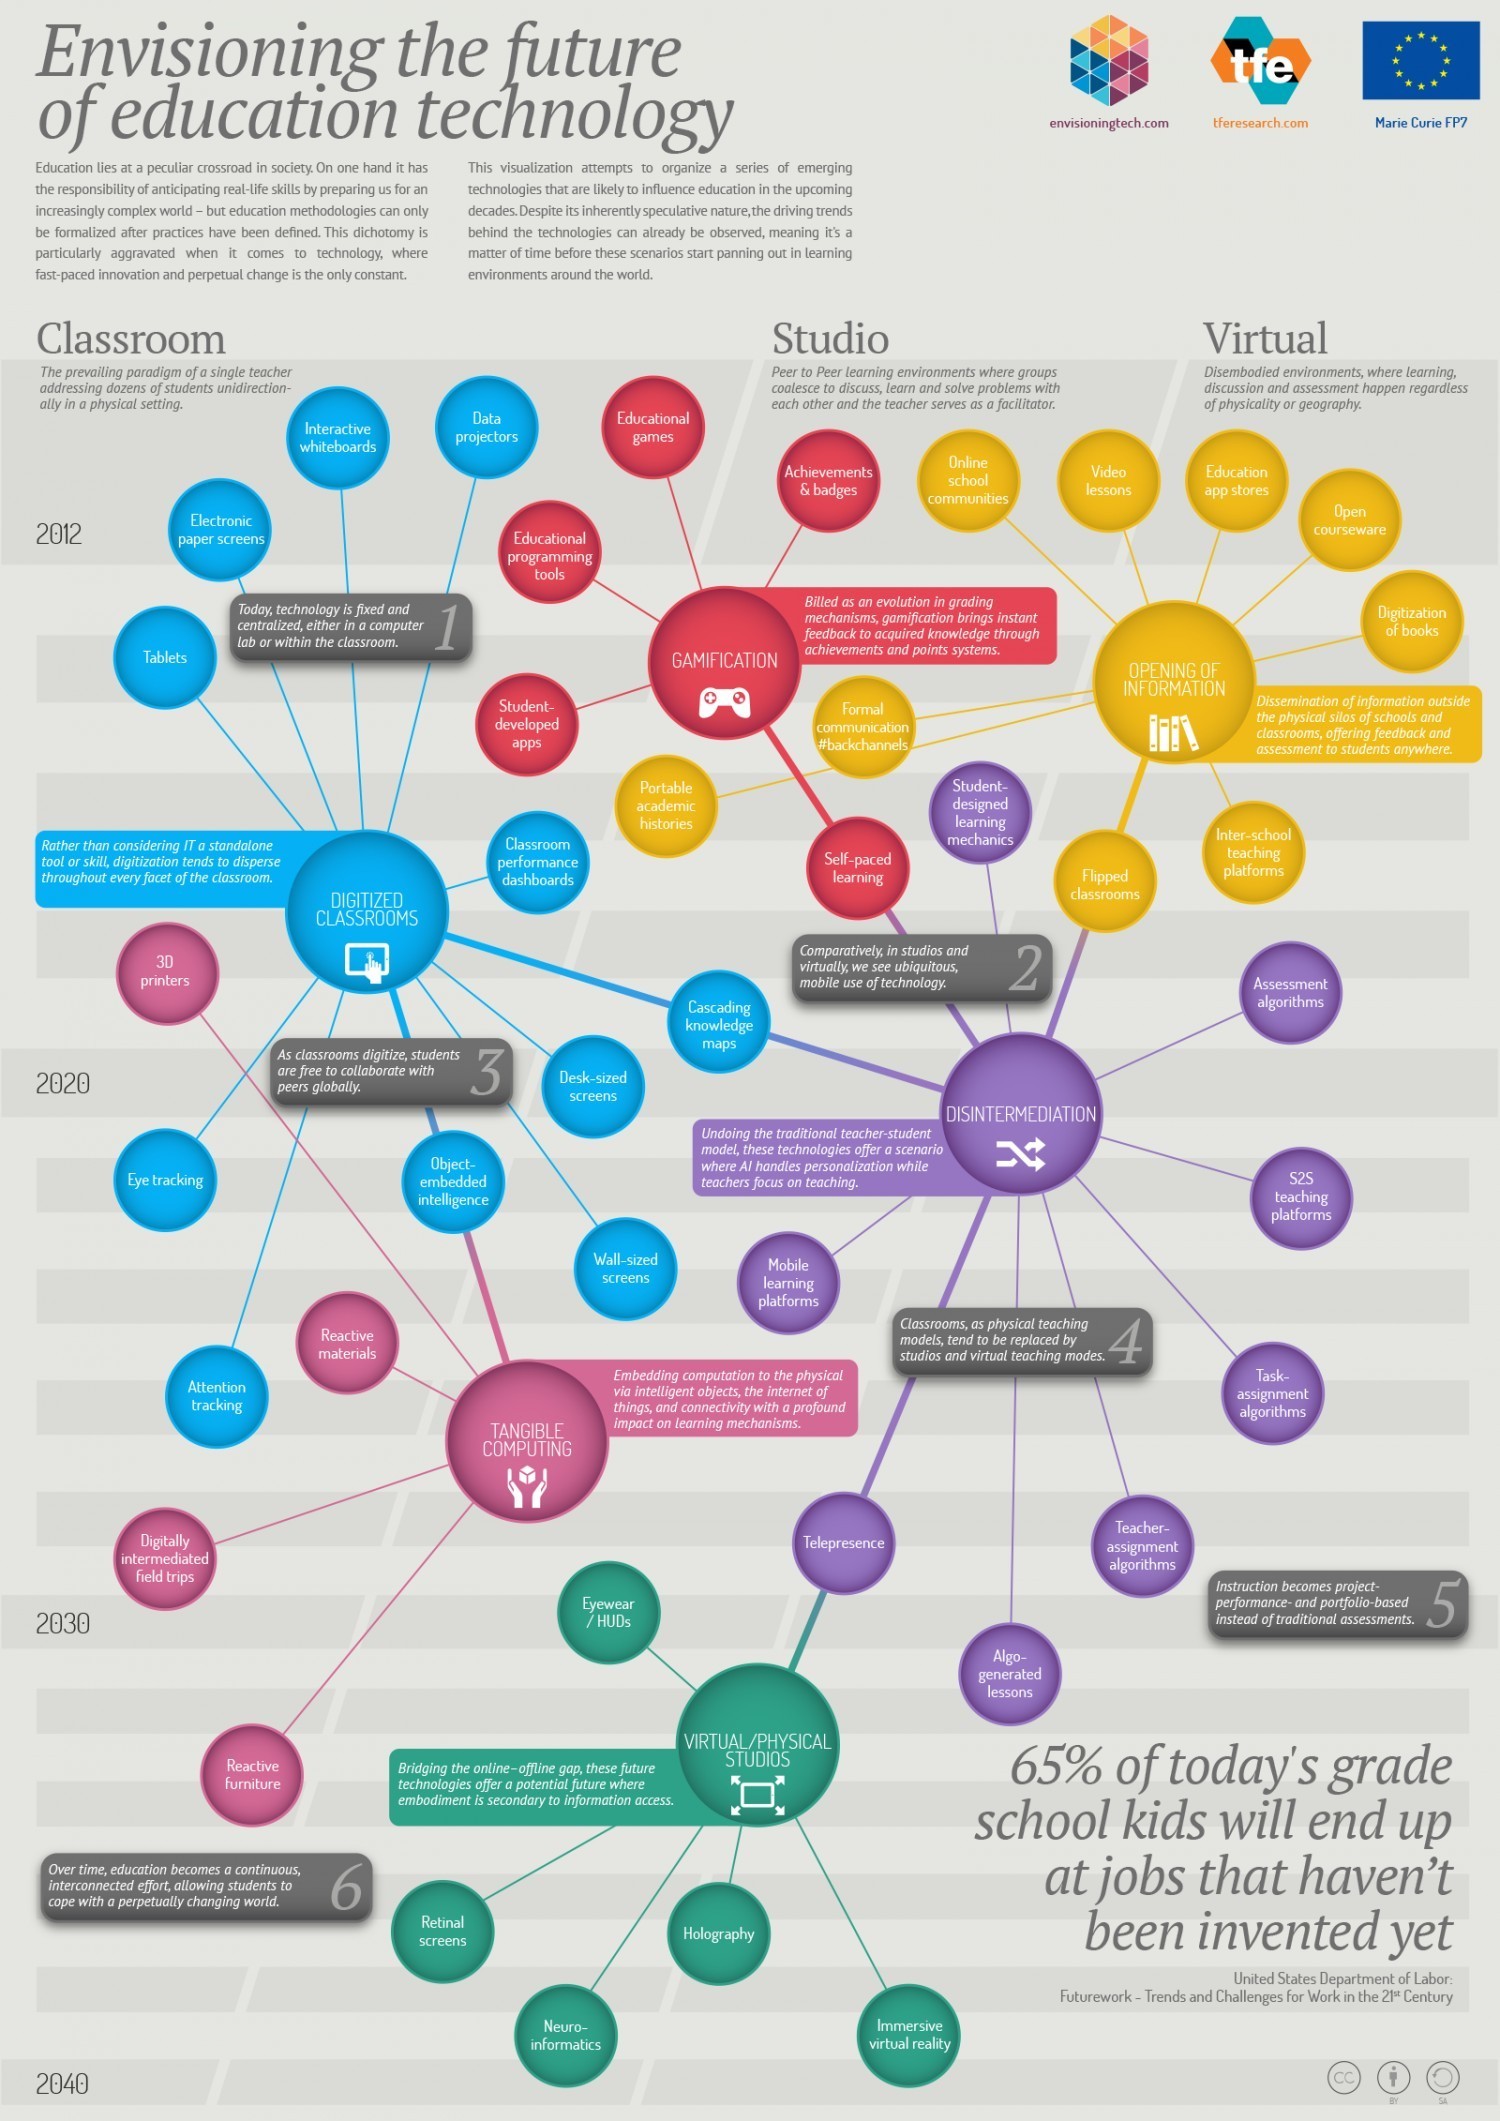 The Future of Education Technology Infographic